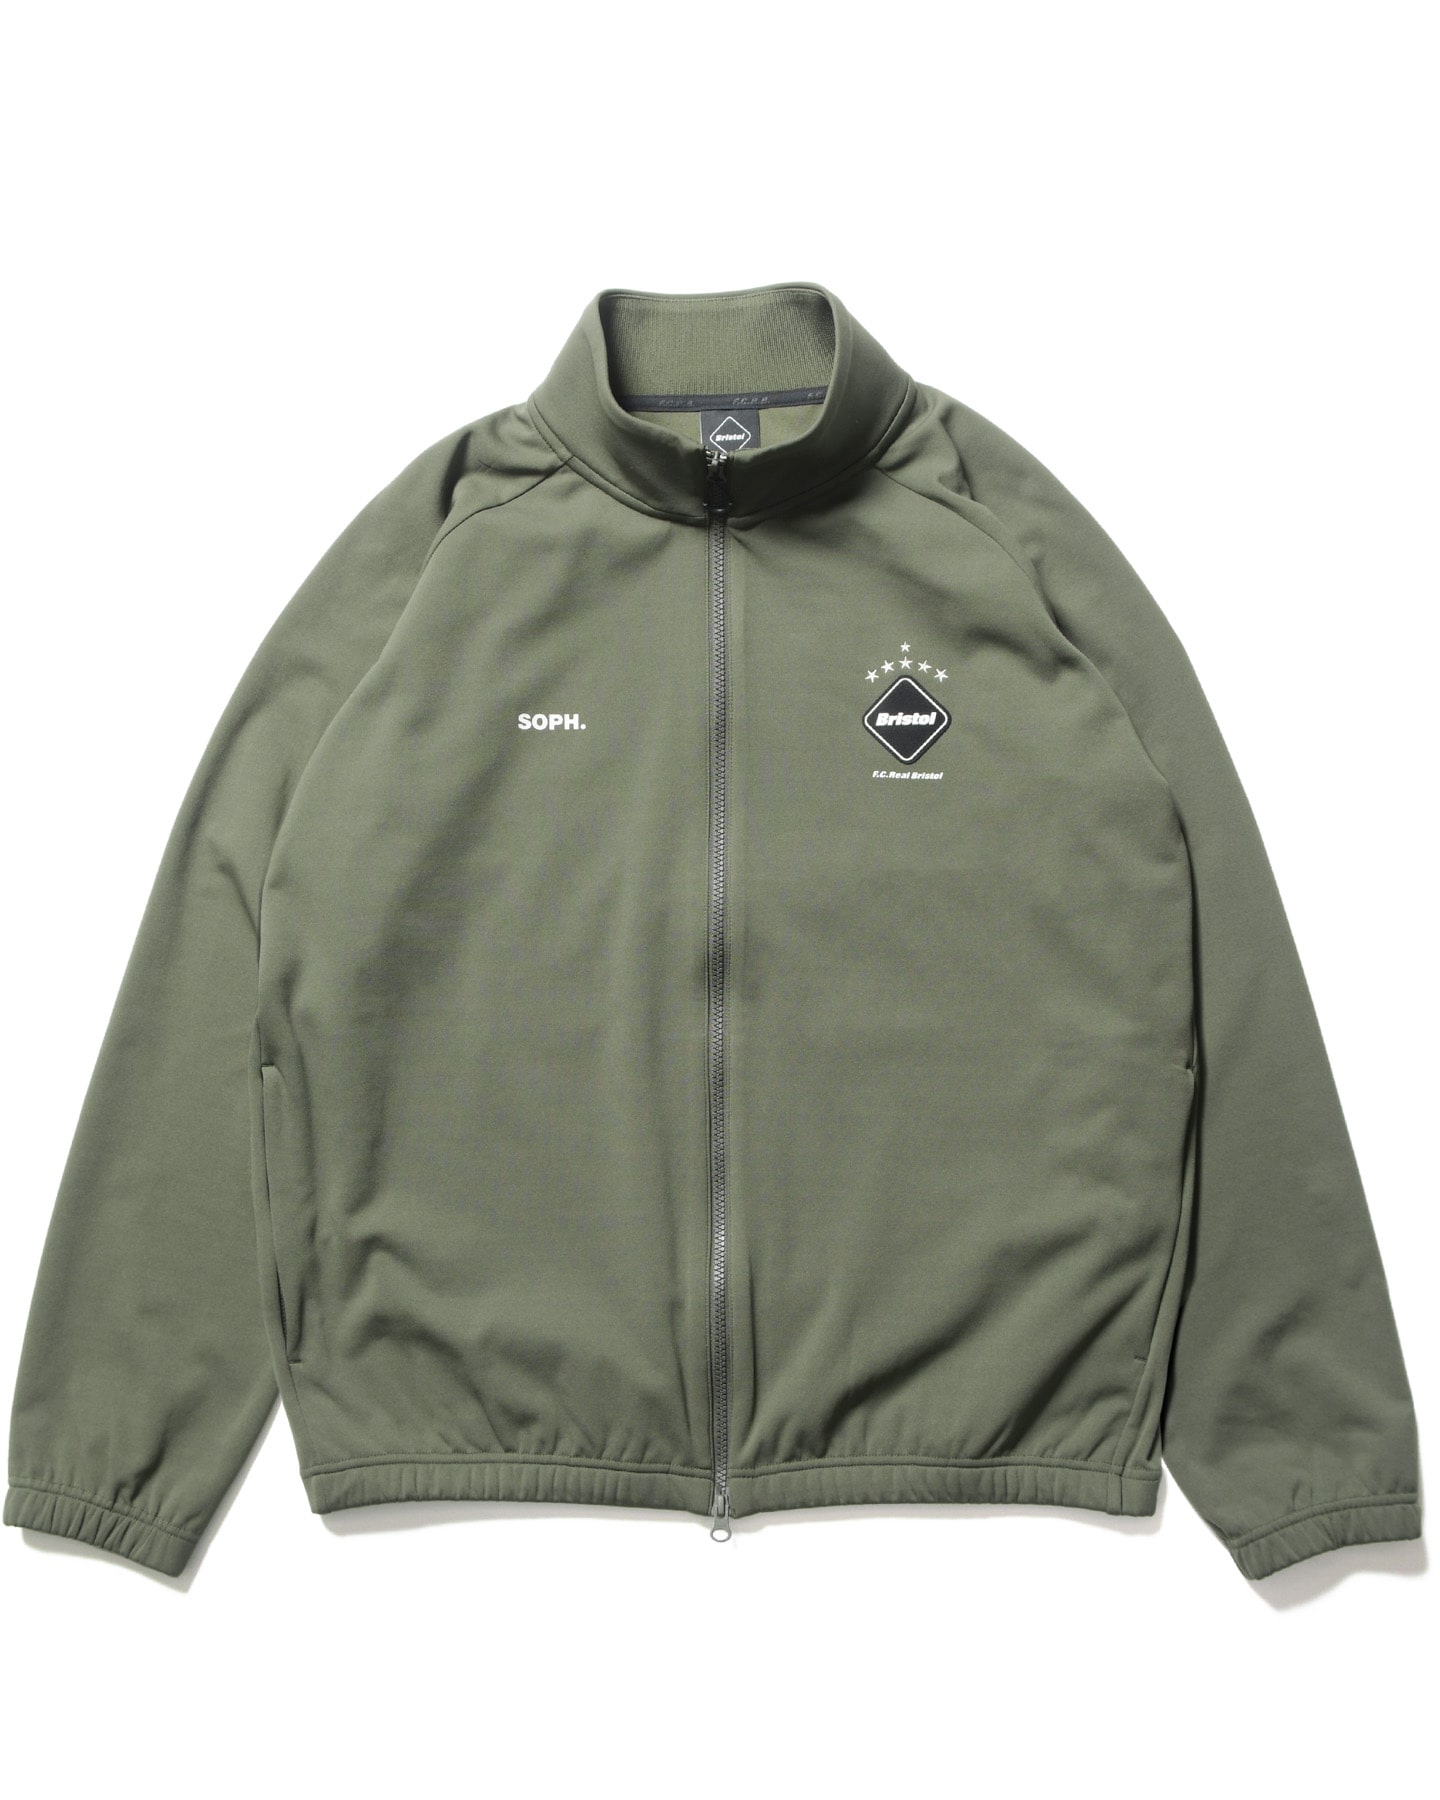 FCRB  PDK JACKET素人採寸ですが